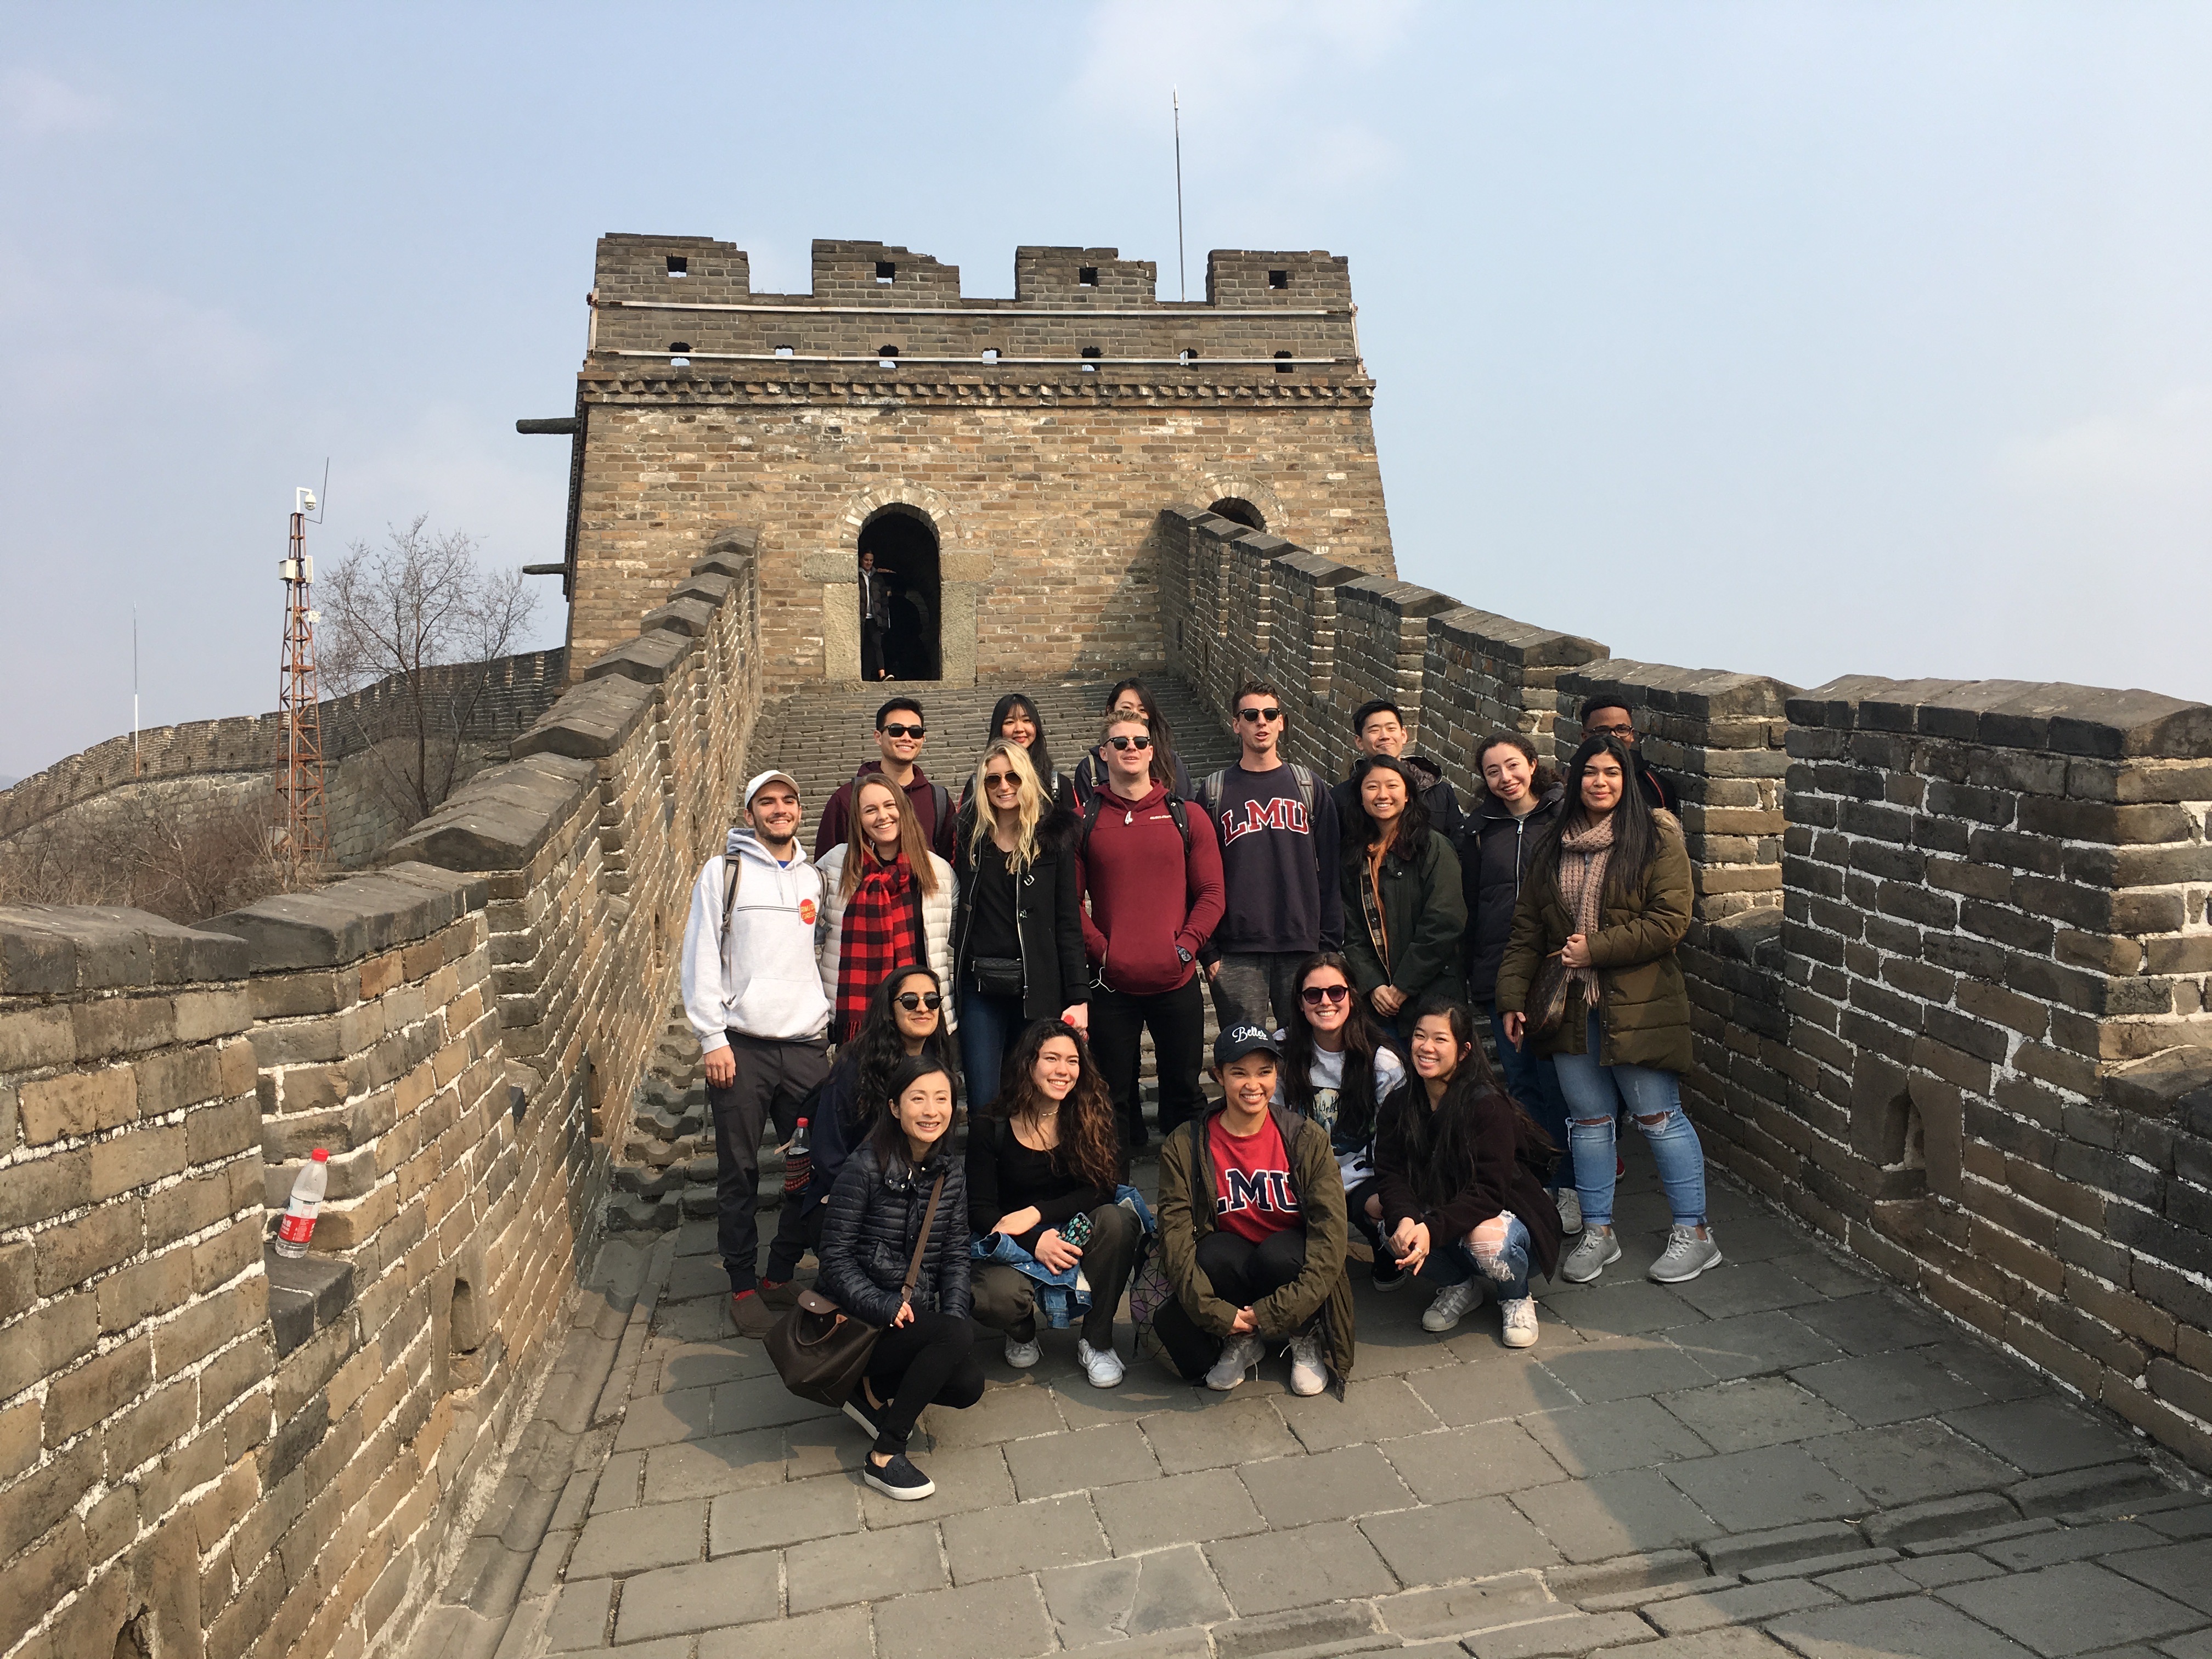 LMU Chinese Language students at the Great Wall of China on an Immersion Trip.